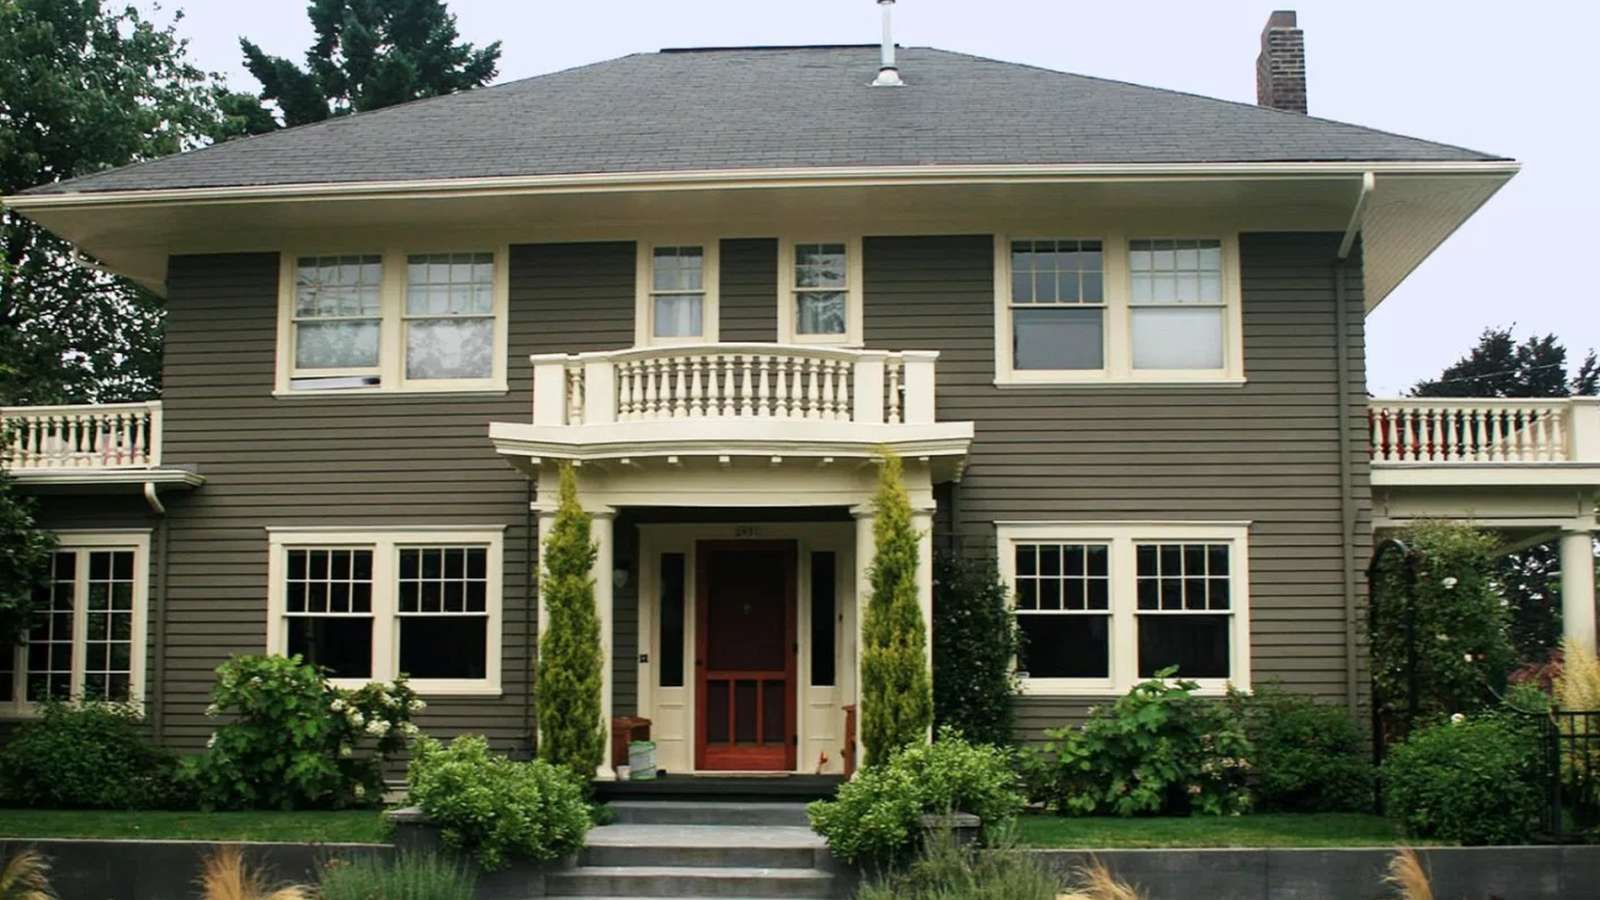 10 Excellent Exterior Color Schemes With Gray Accents